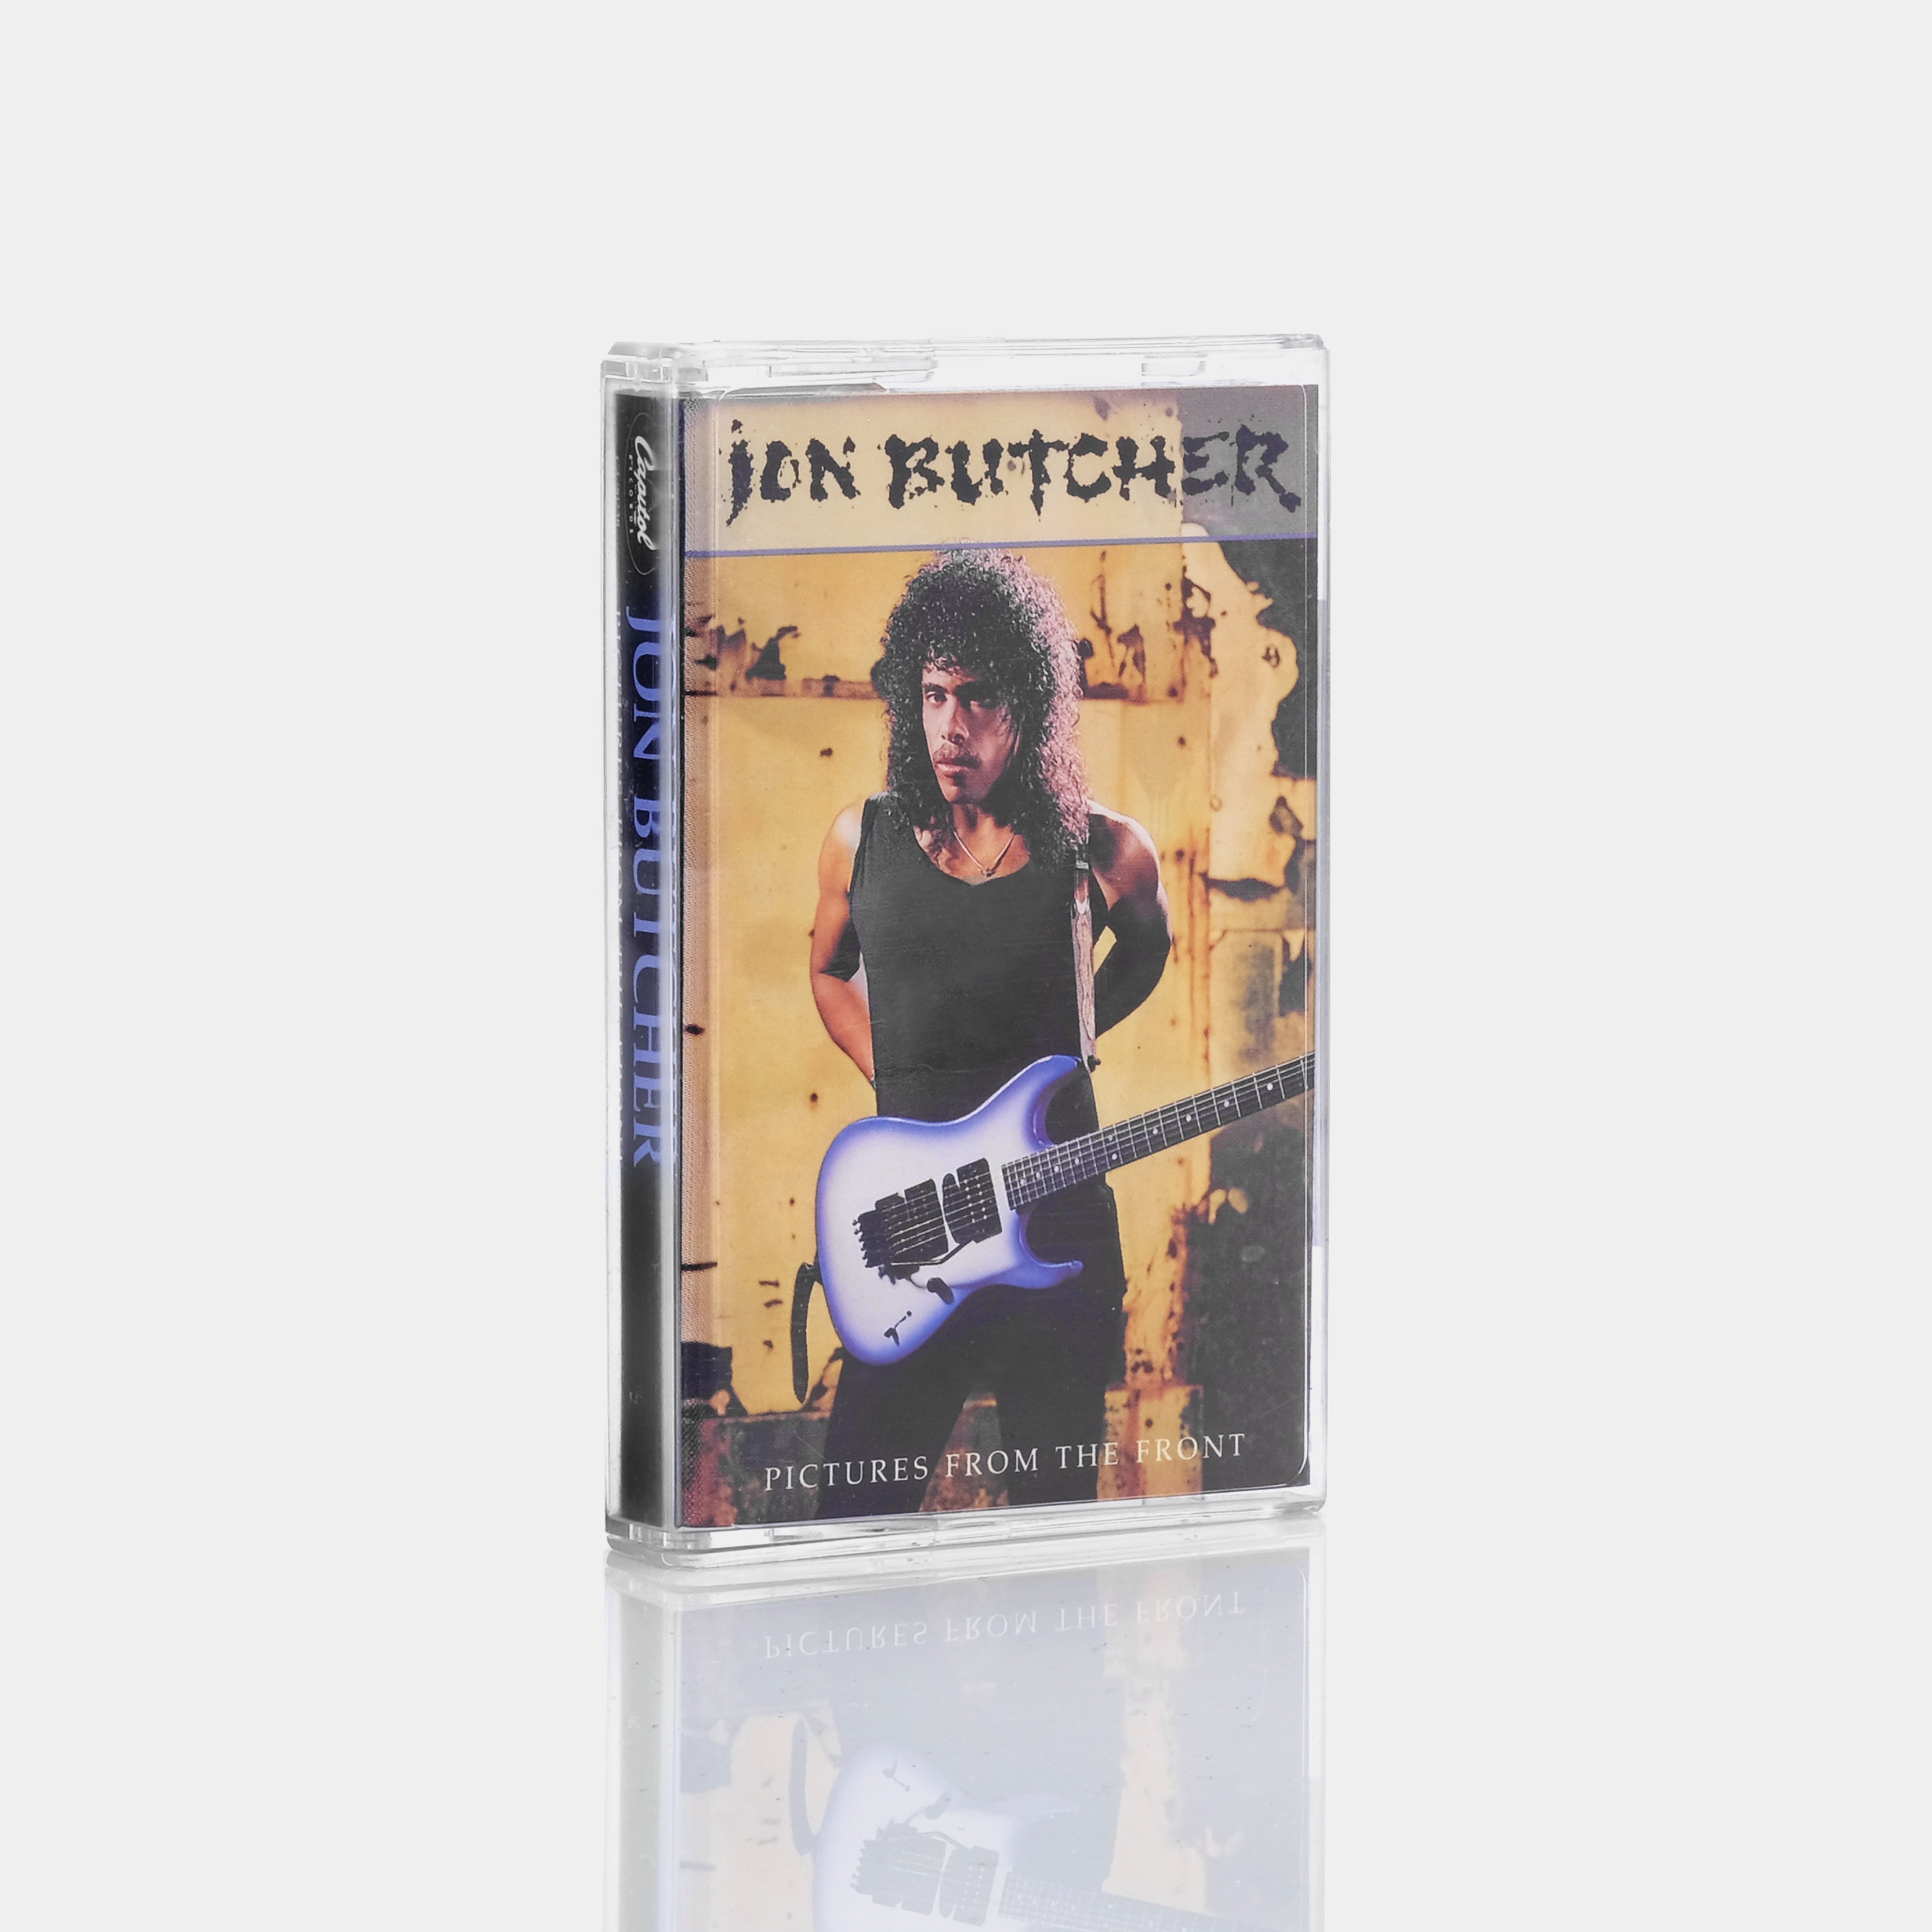 Jon Butcher - Pictures From The Front Cassette Tape